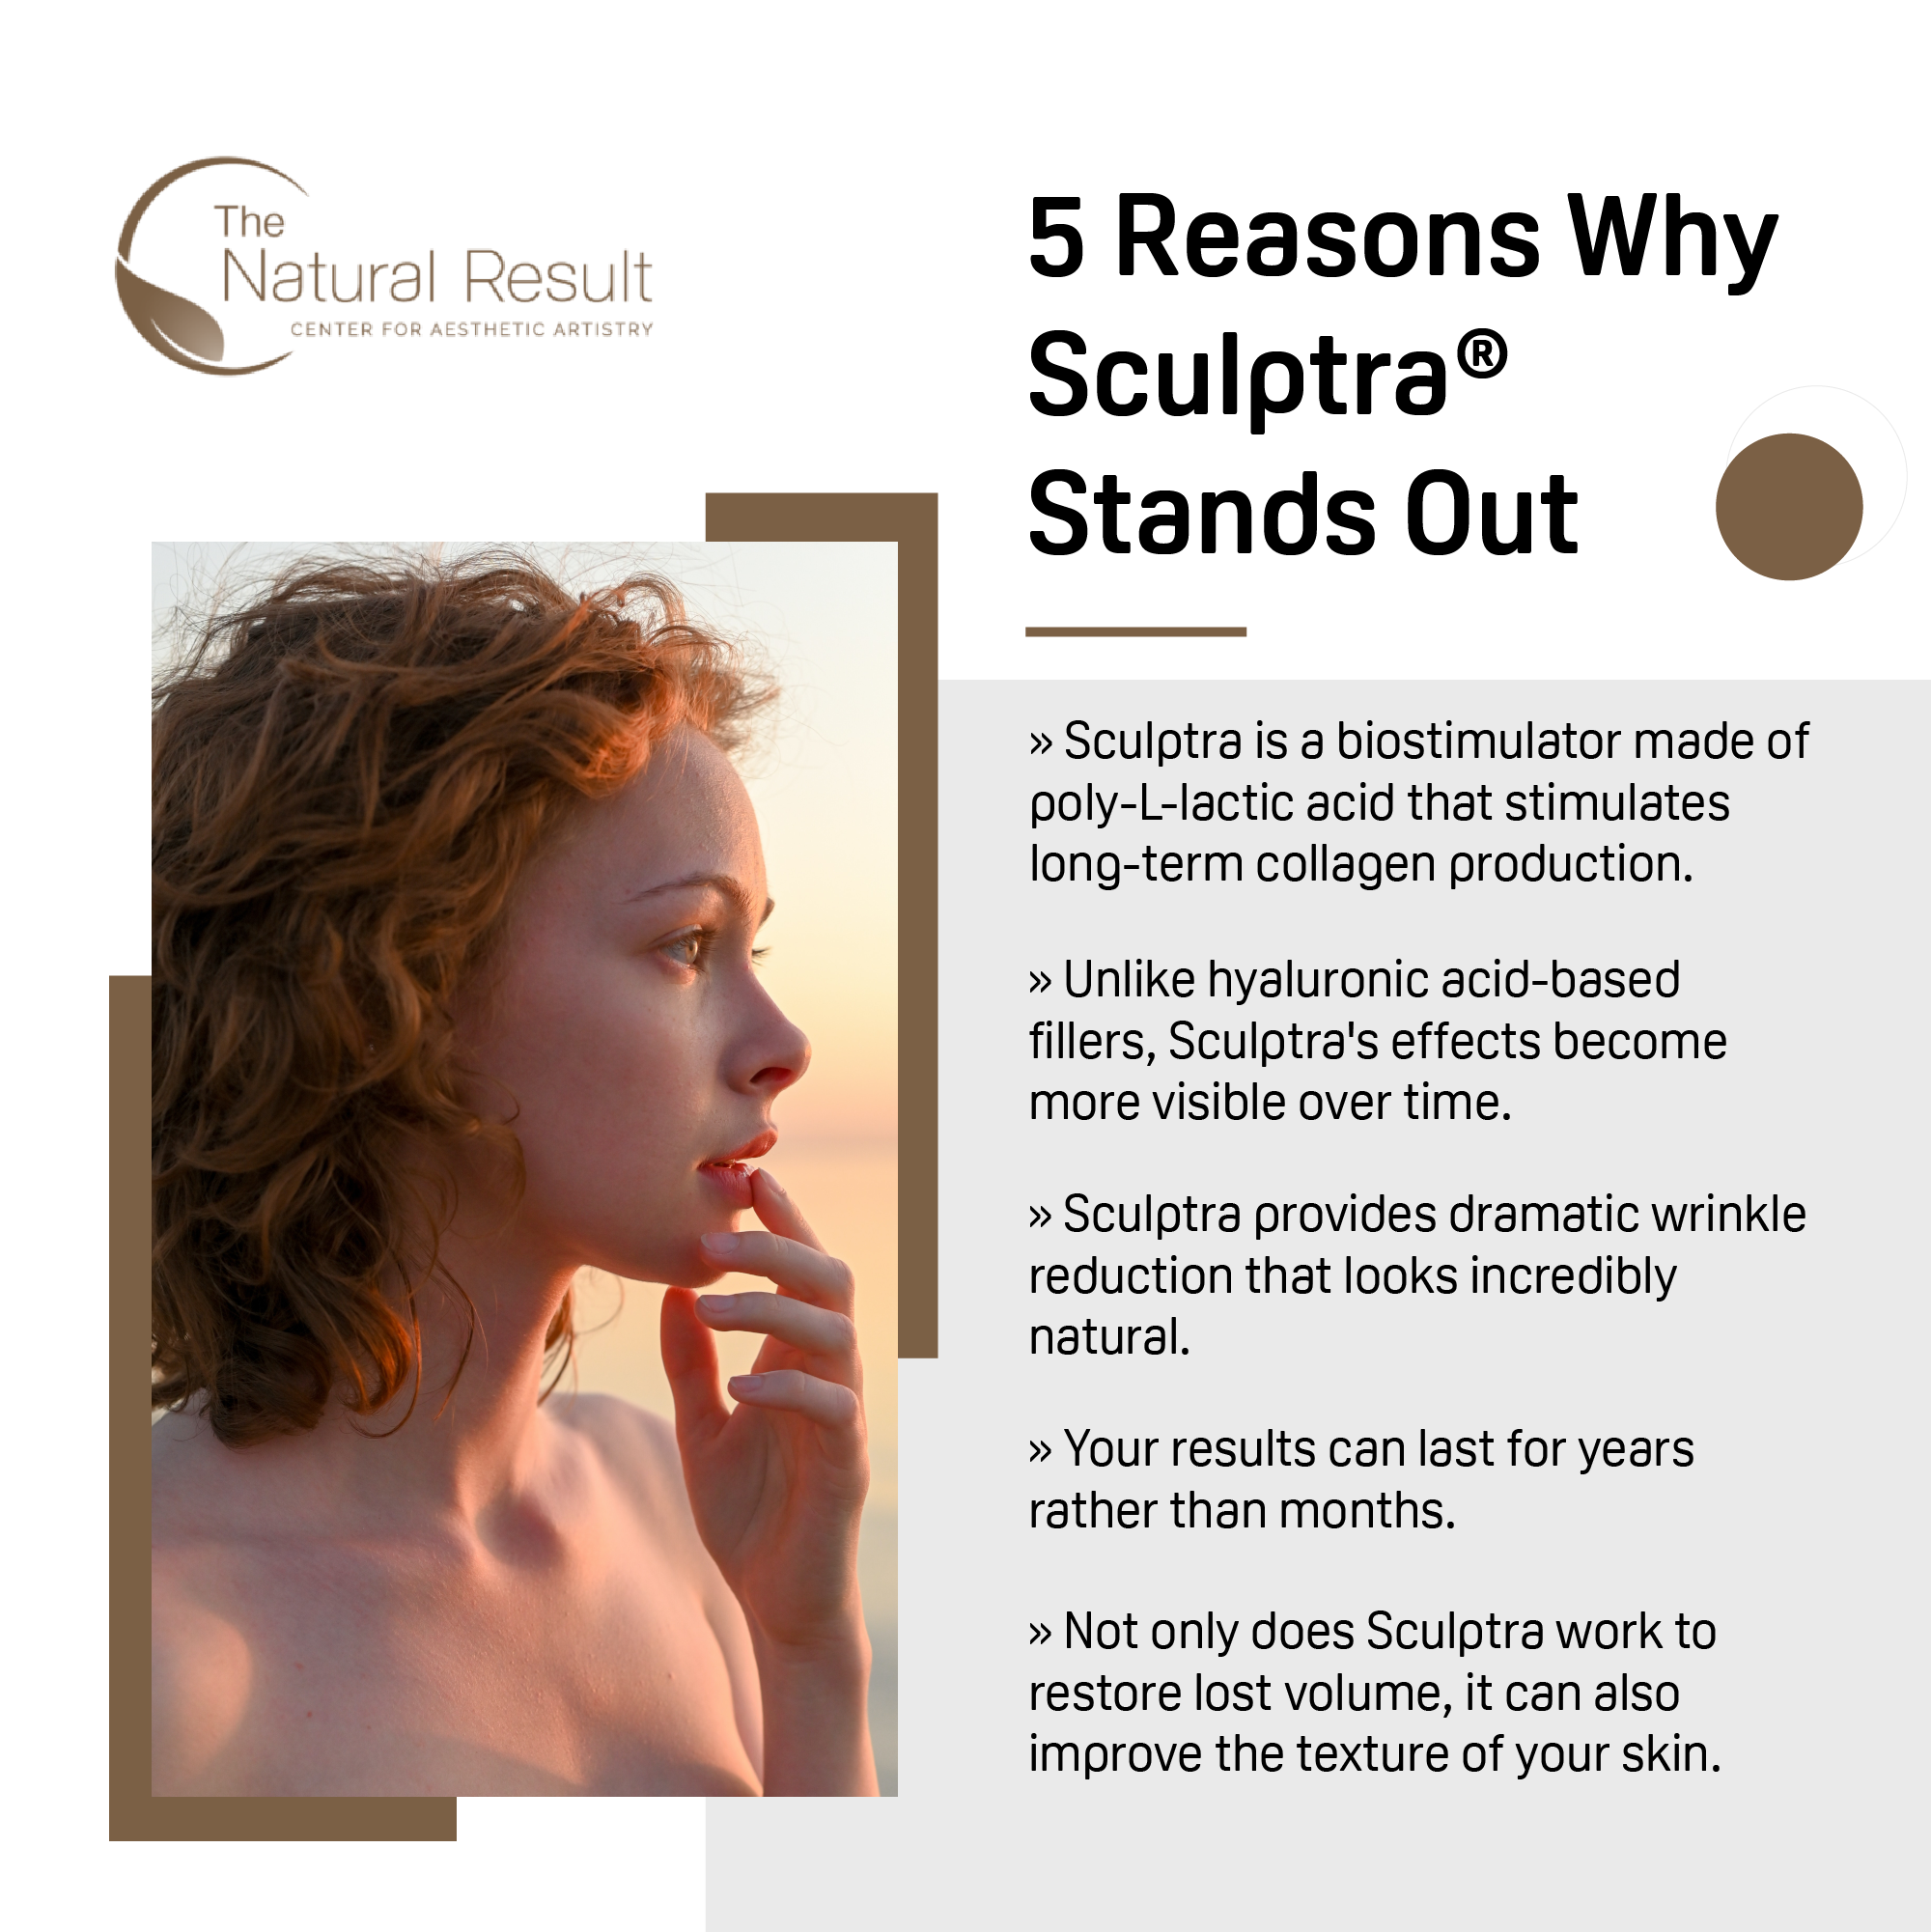 5 Reasons Why Sculptra® Stands Out